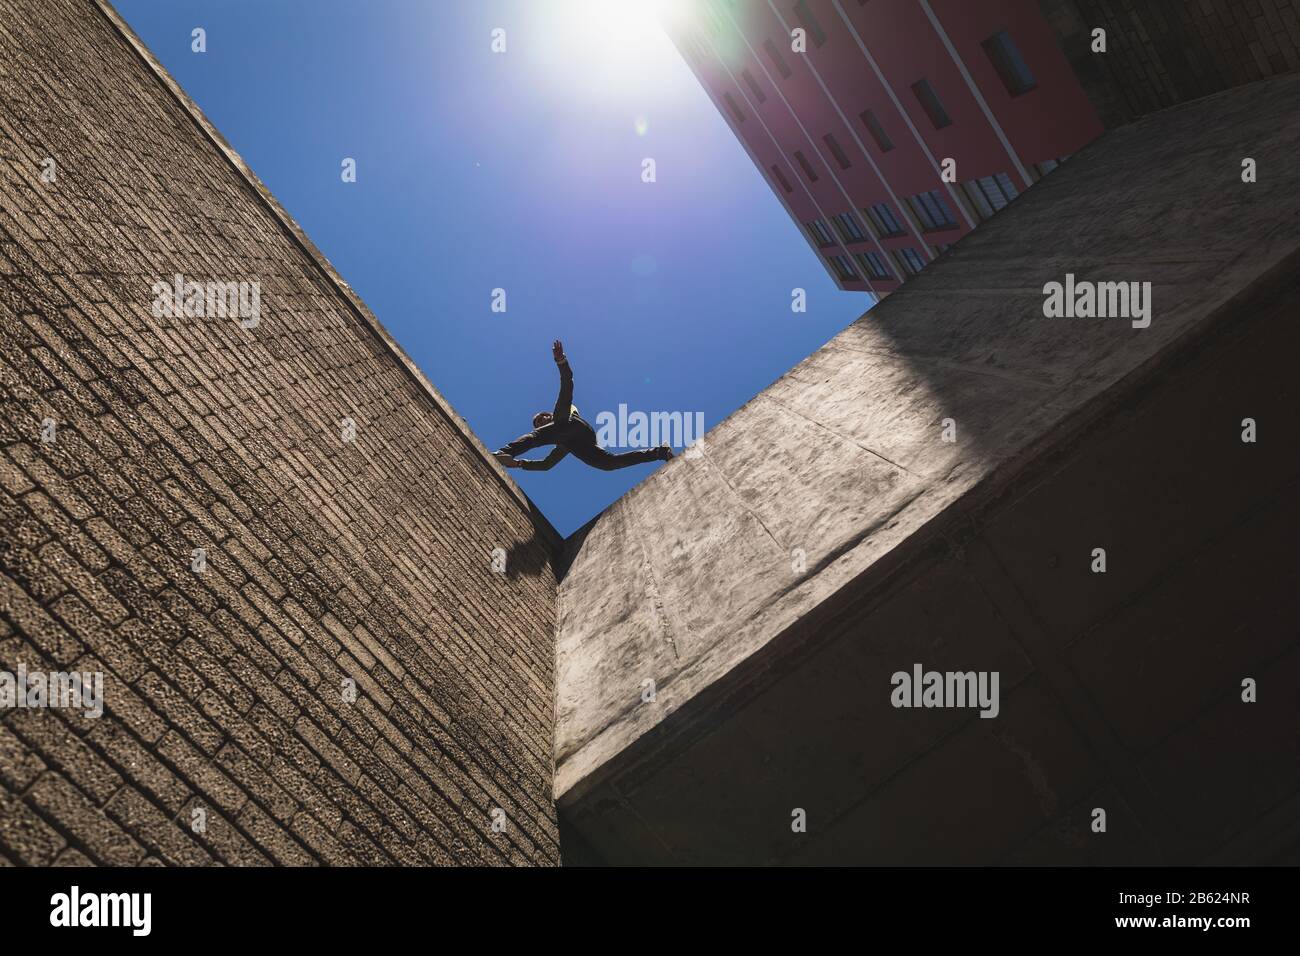 Caucasian man jumping from building Stock Photo